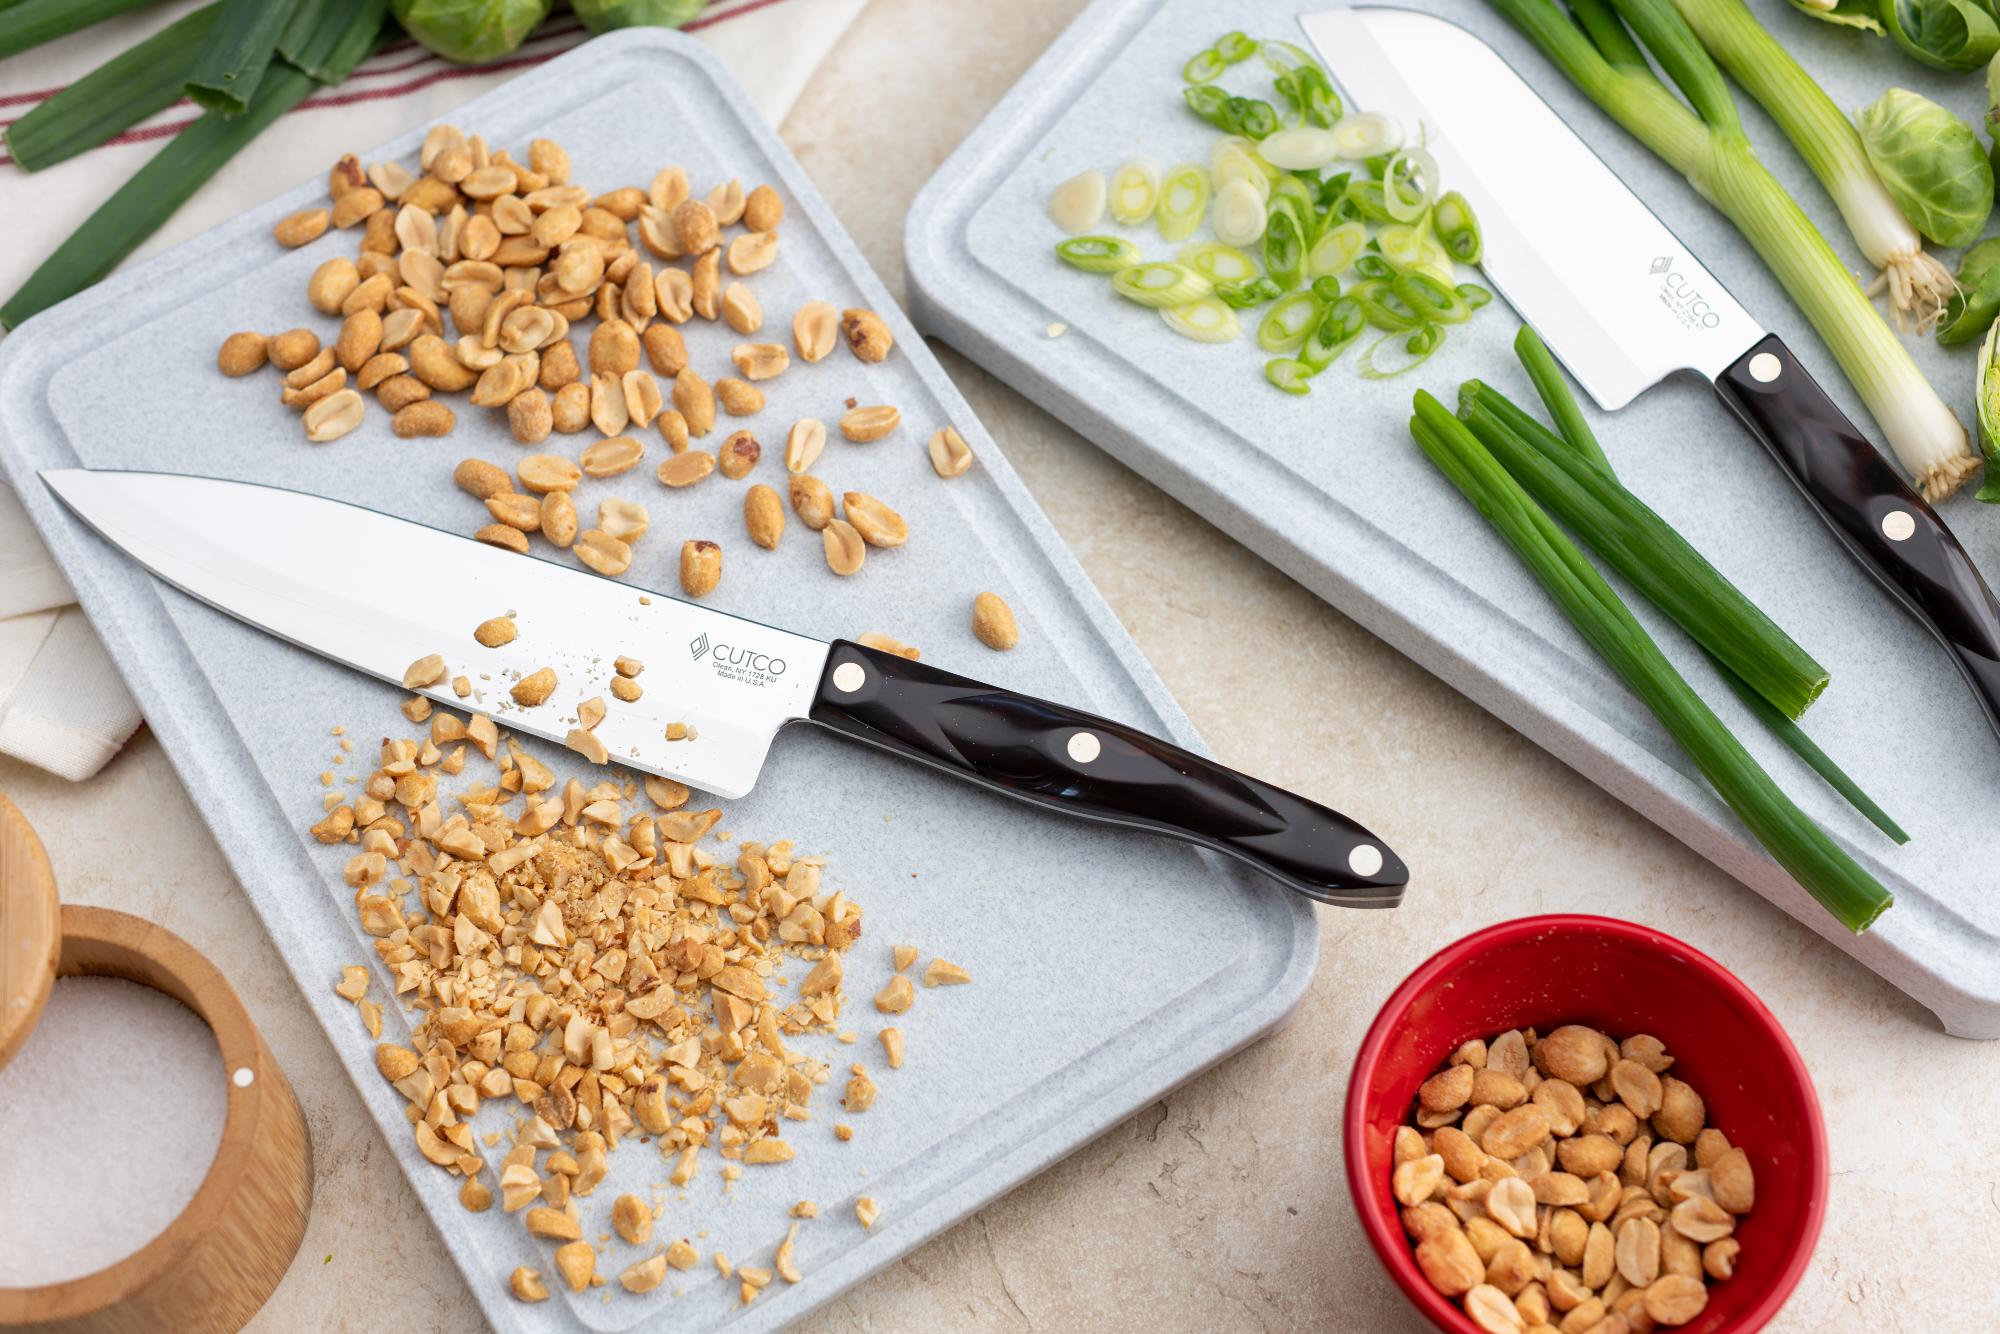 Chopped peanuts with the Petite Chef.